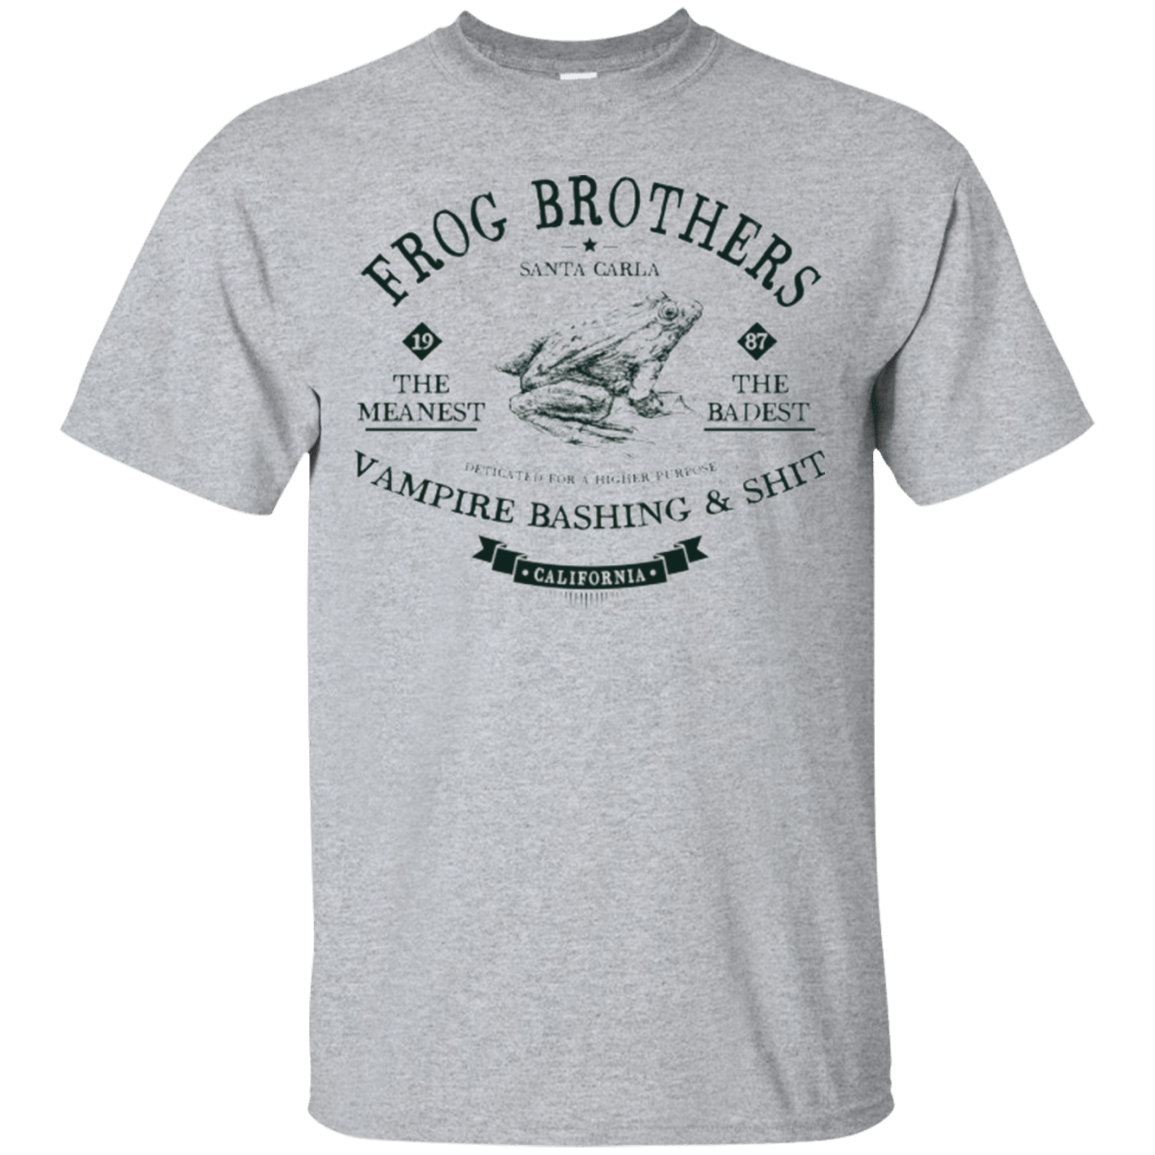 T-Shirts Sport Grey / Small Frog Brothers T-Shirt